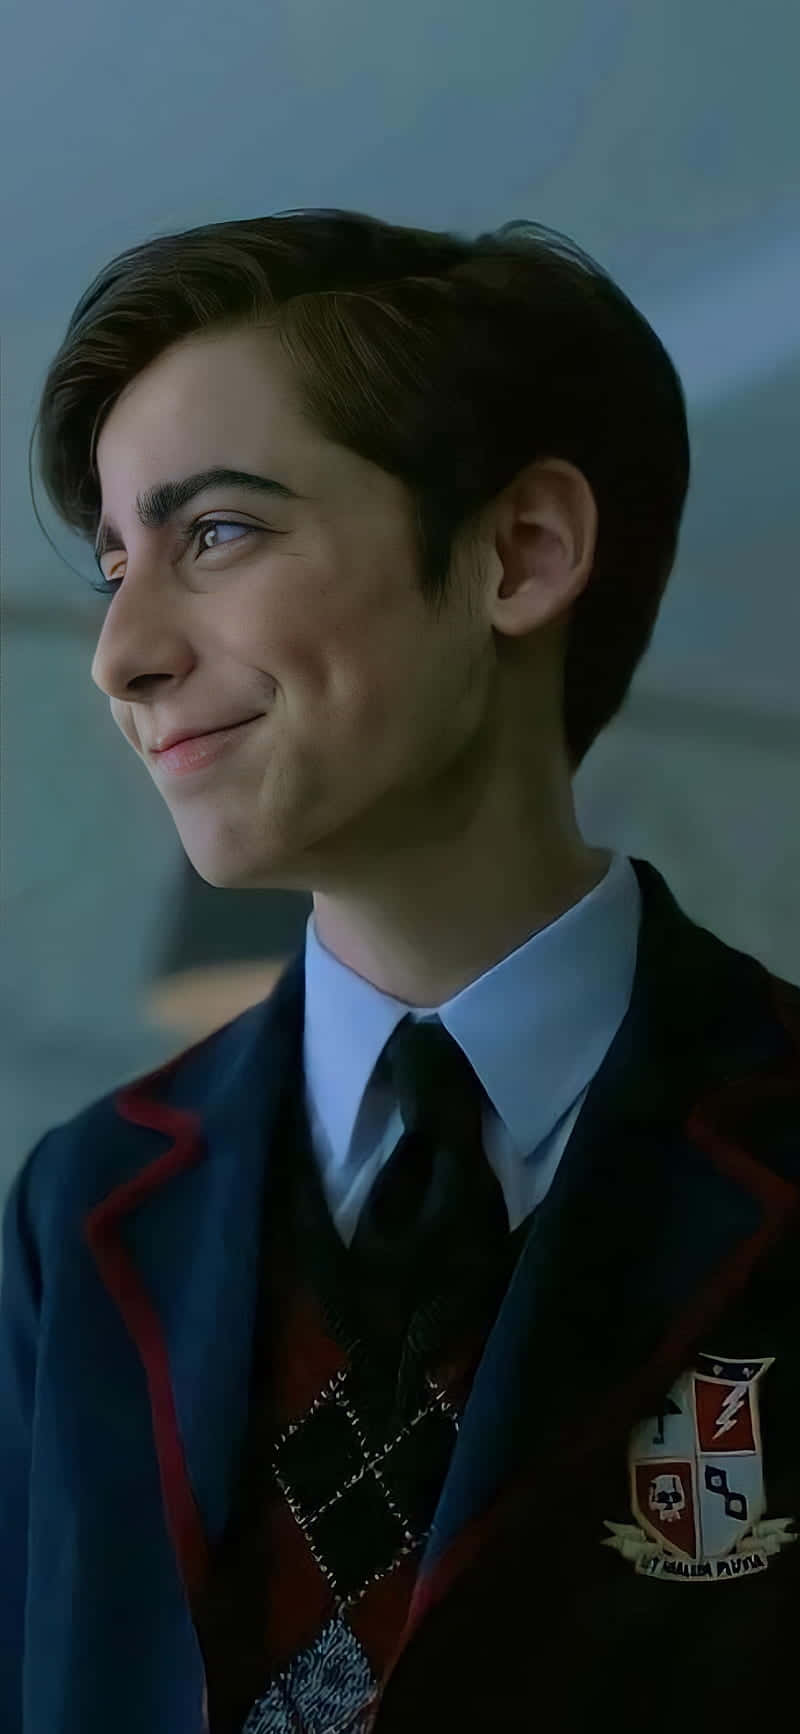 A Young Man In A School Uniform Is Smiling Wallpaper